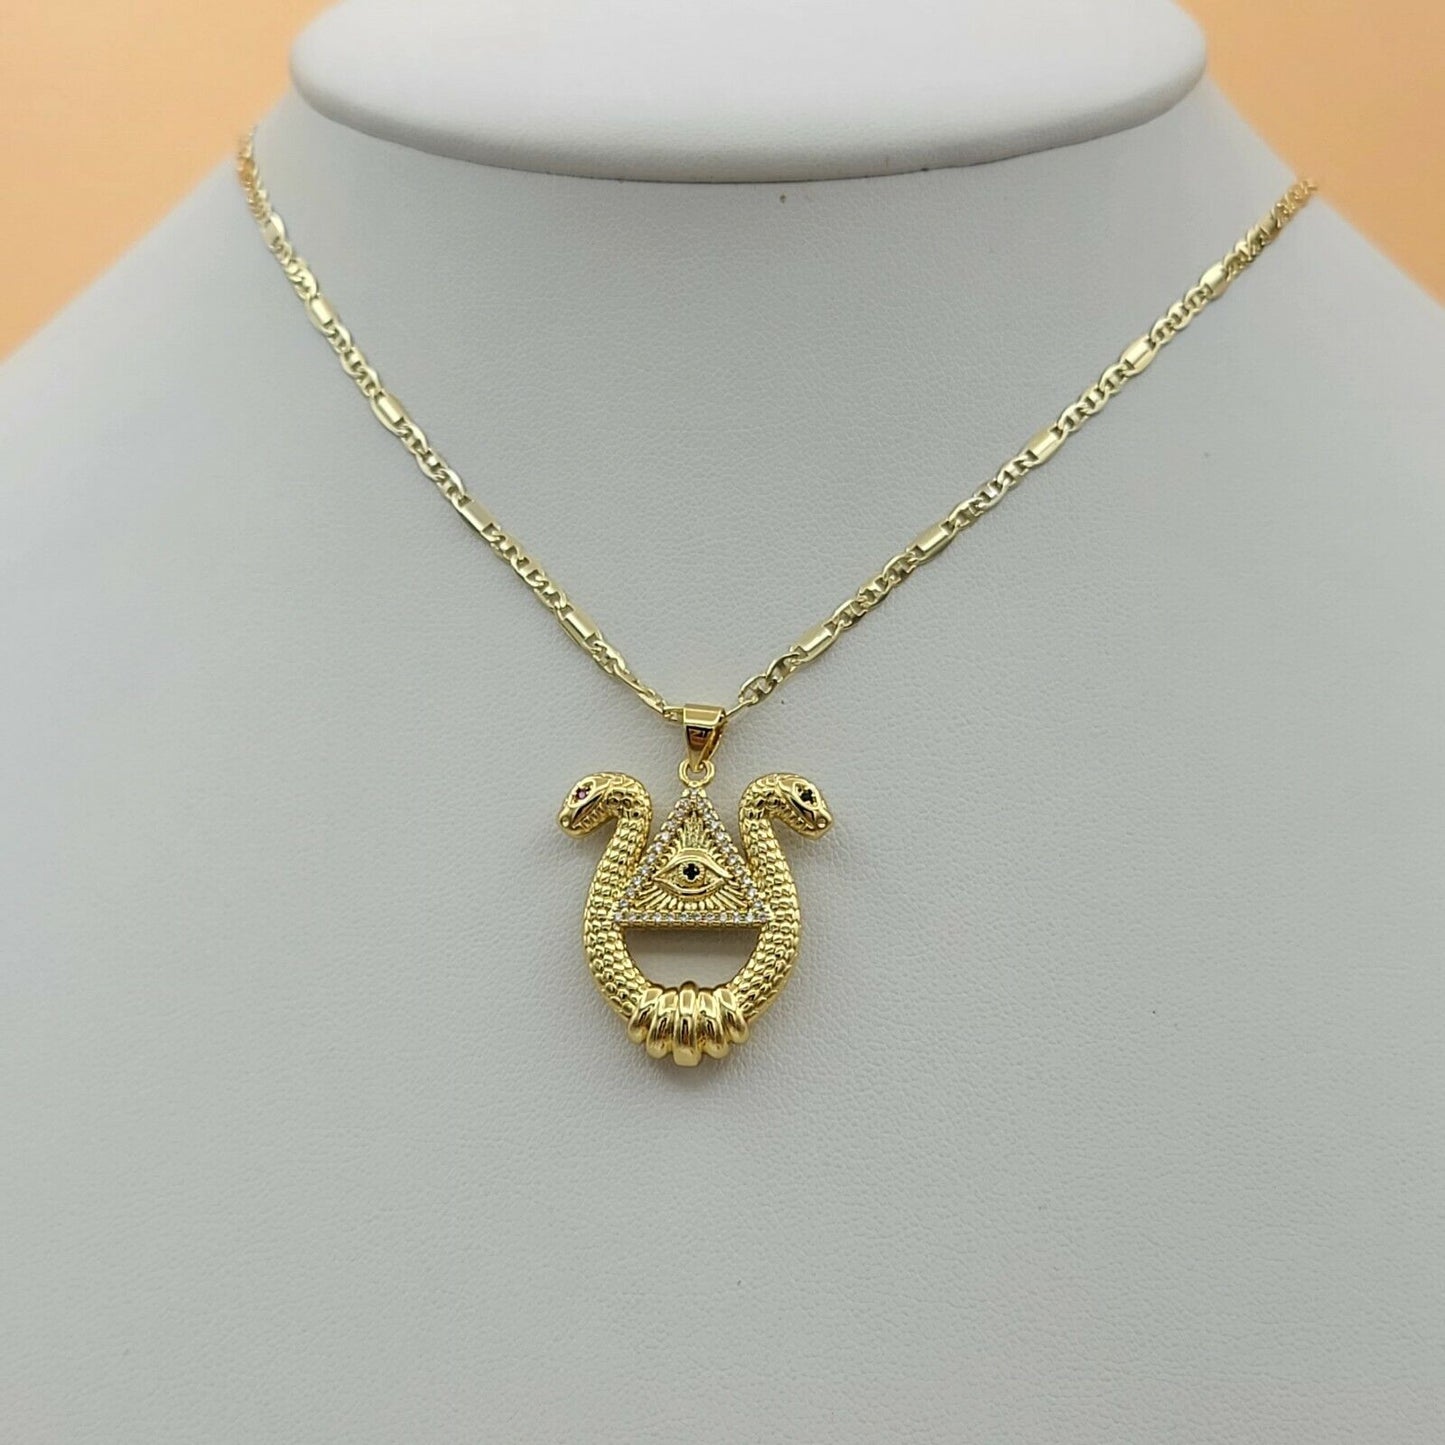 Necklaces - 14K Gold Plated. Double Head Snake Eye Providence Divine Vision Pendant & Chain.